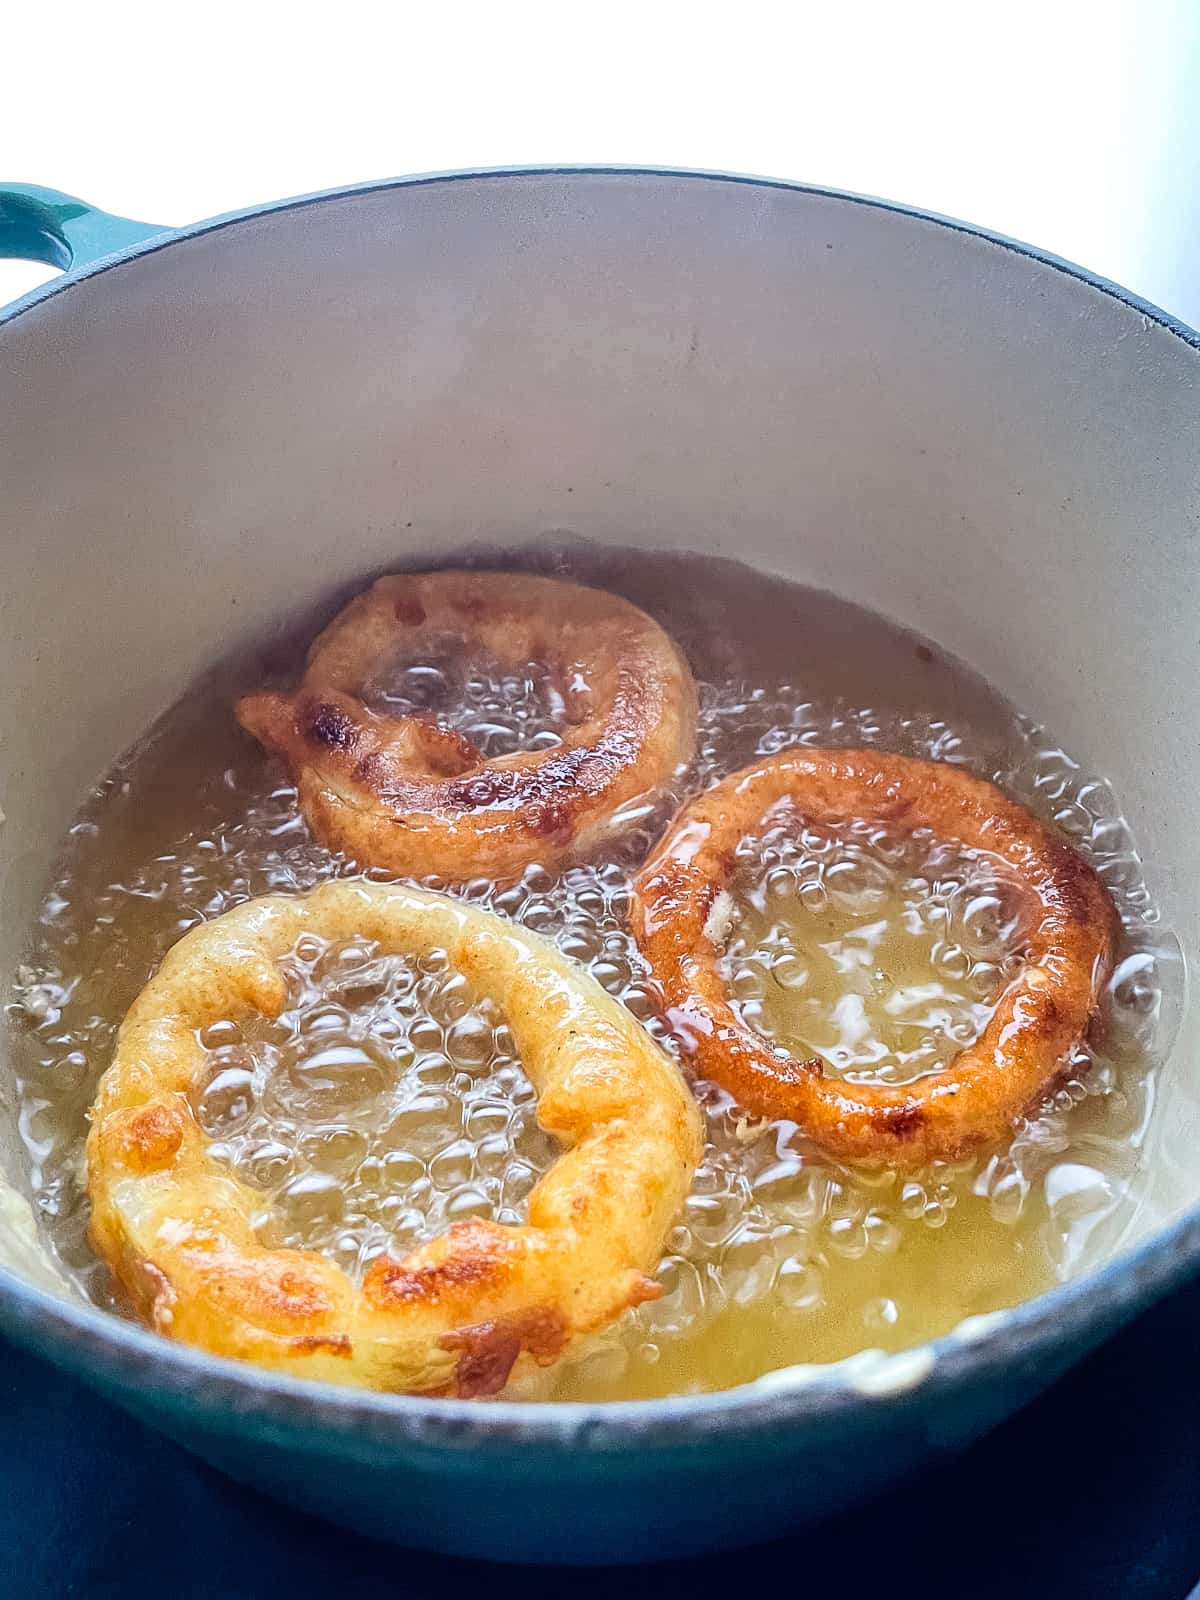 Three onion rings frying in a pot of oil.